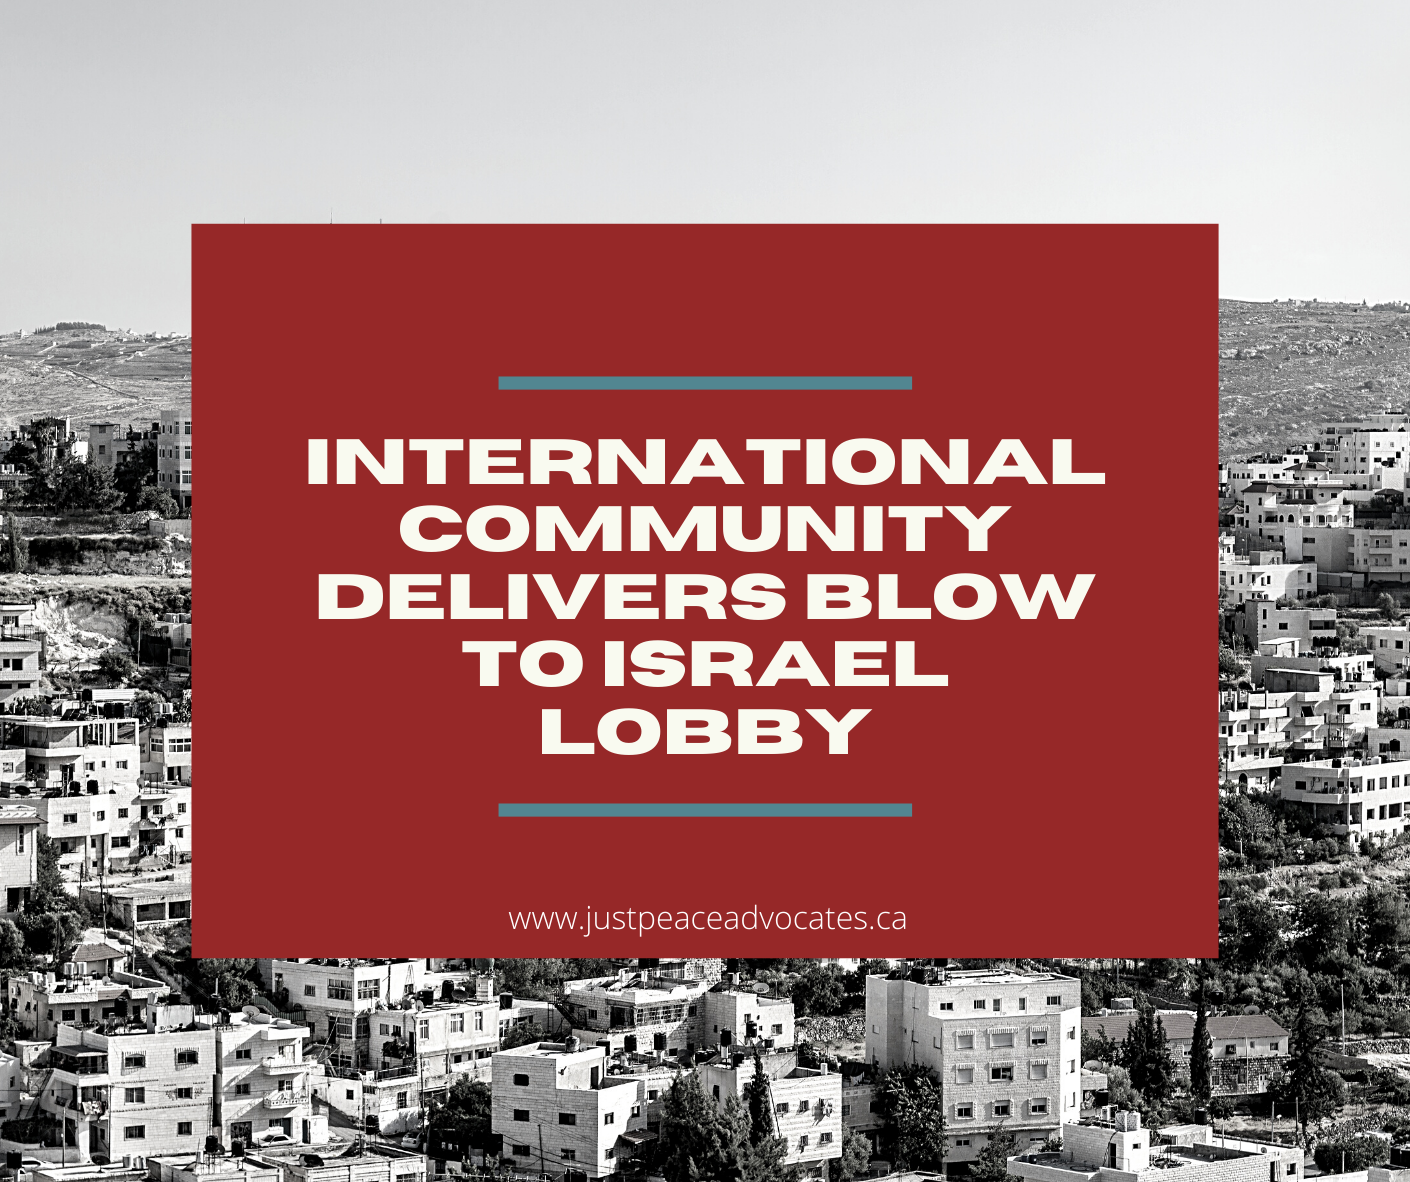 International community delivers blow to Israel lobby